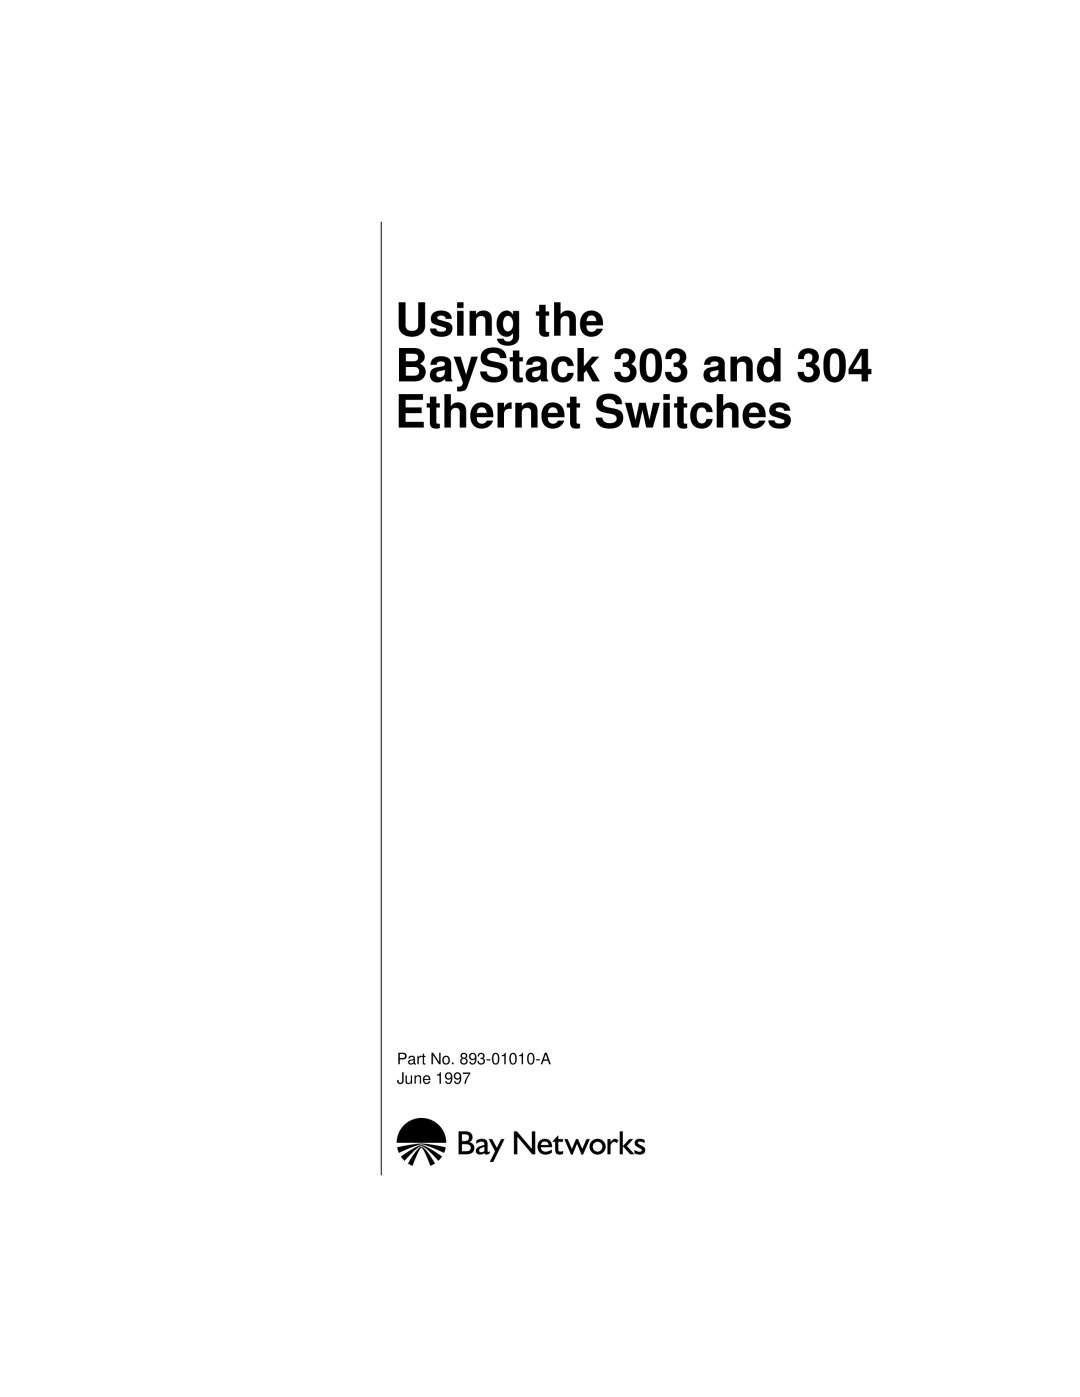 Bay Technical Associates 304 manual Using BayStack 303 Ethernet Switches 